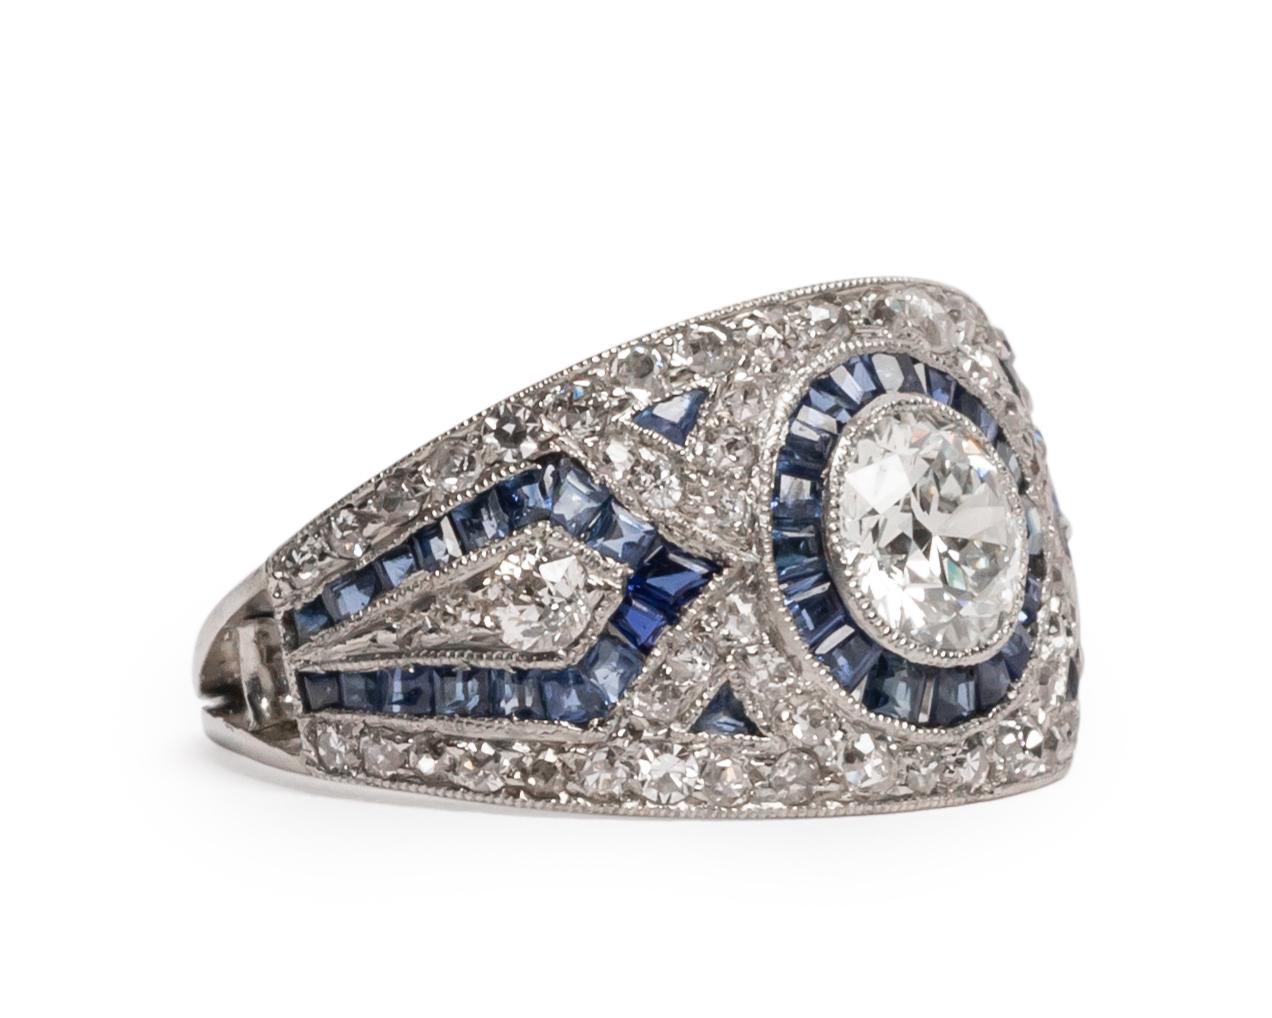 Here we have an beautiful example of an Art Deco era engagement ring! This genuine 1920's ring features a stunning intricate, geometric design in a highly detailed platinum ring. The beautifully crafted platinum ring is decorated with pave old cut